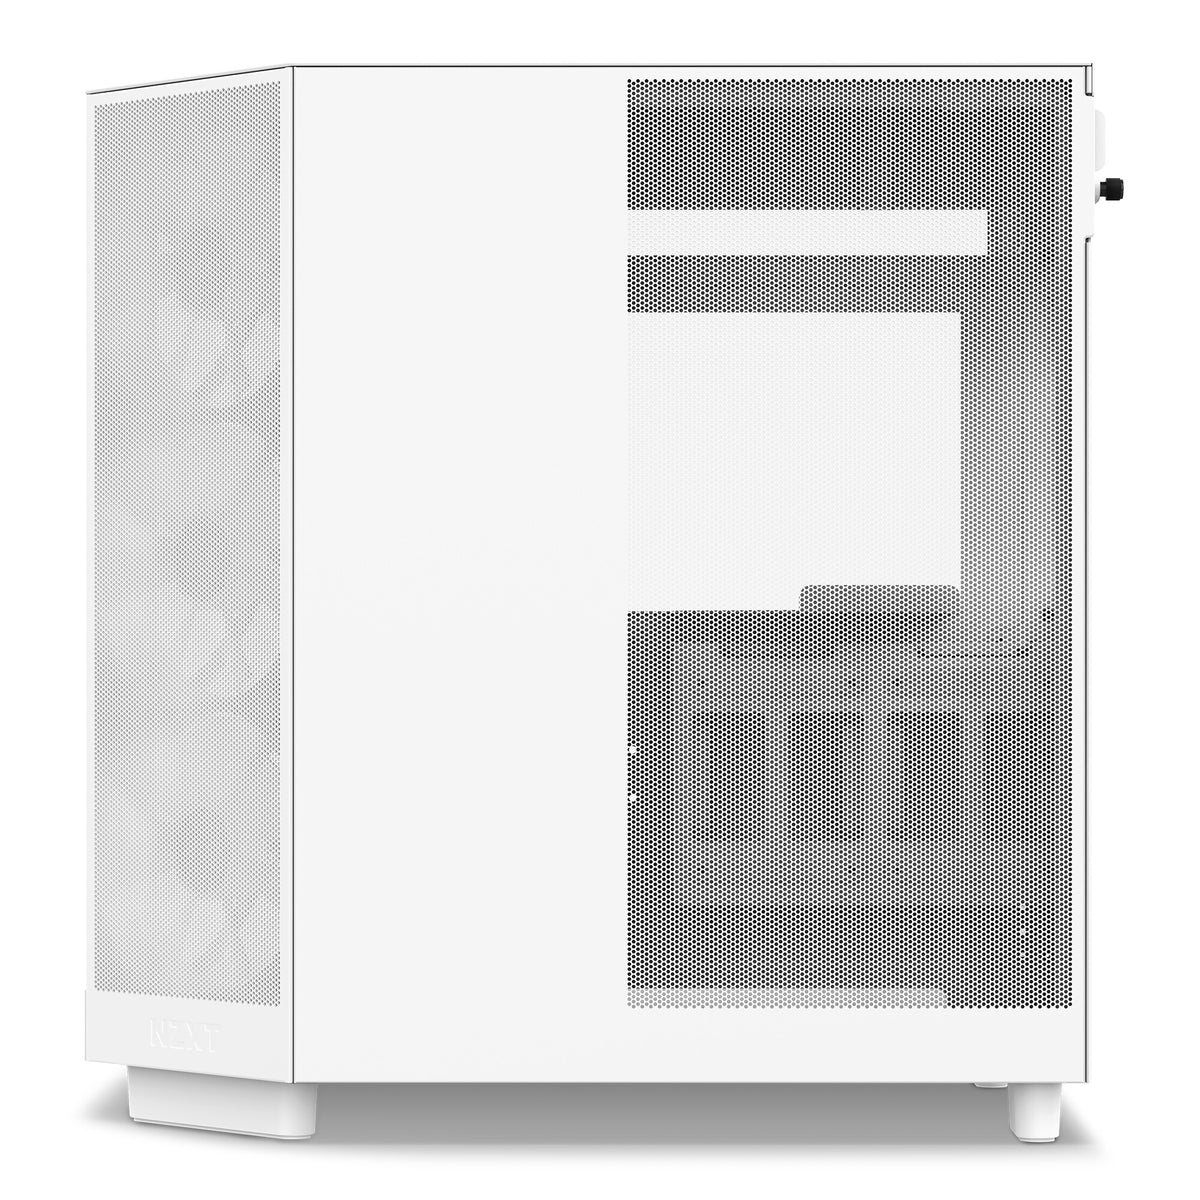 NZXT H6 Flow RGB - ATX Mid Tower Case in White